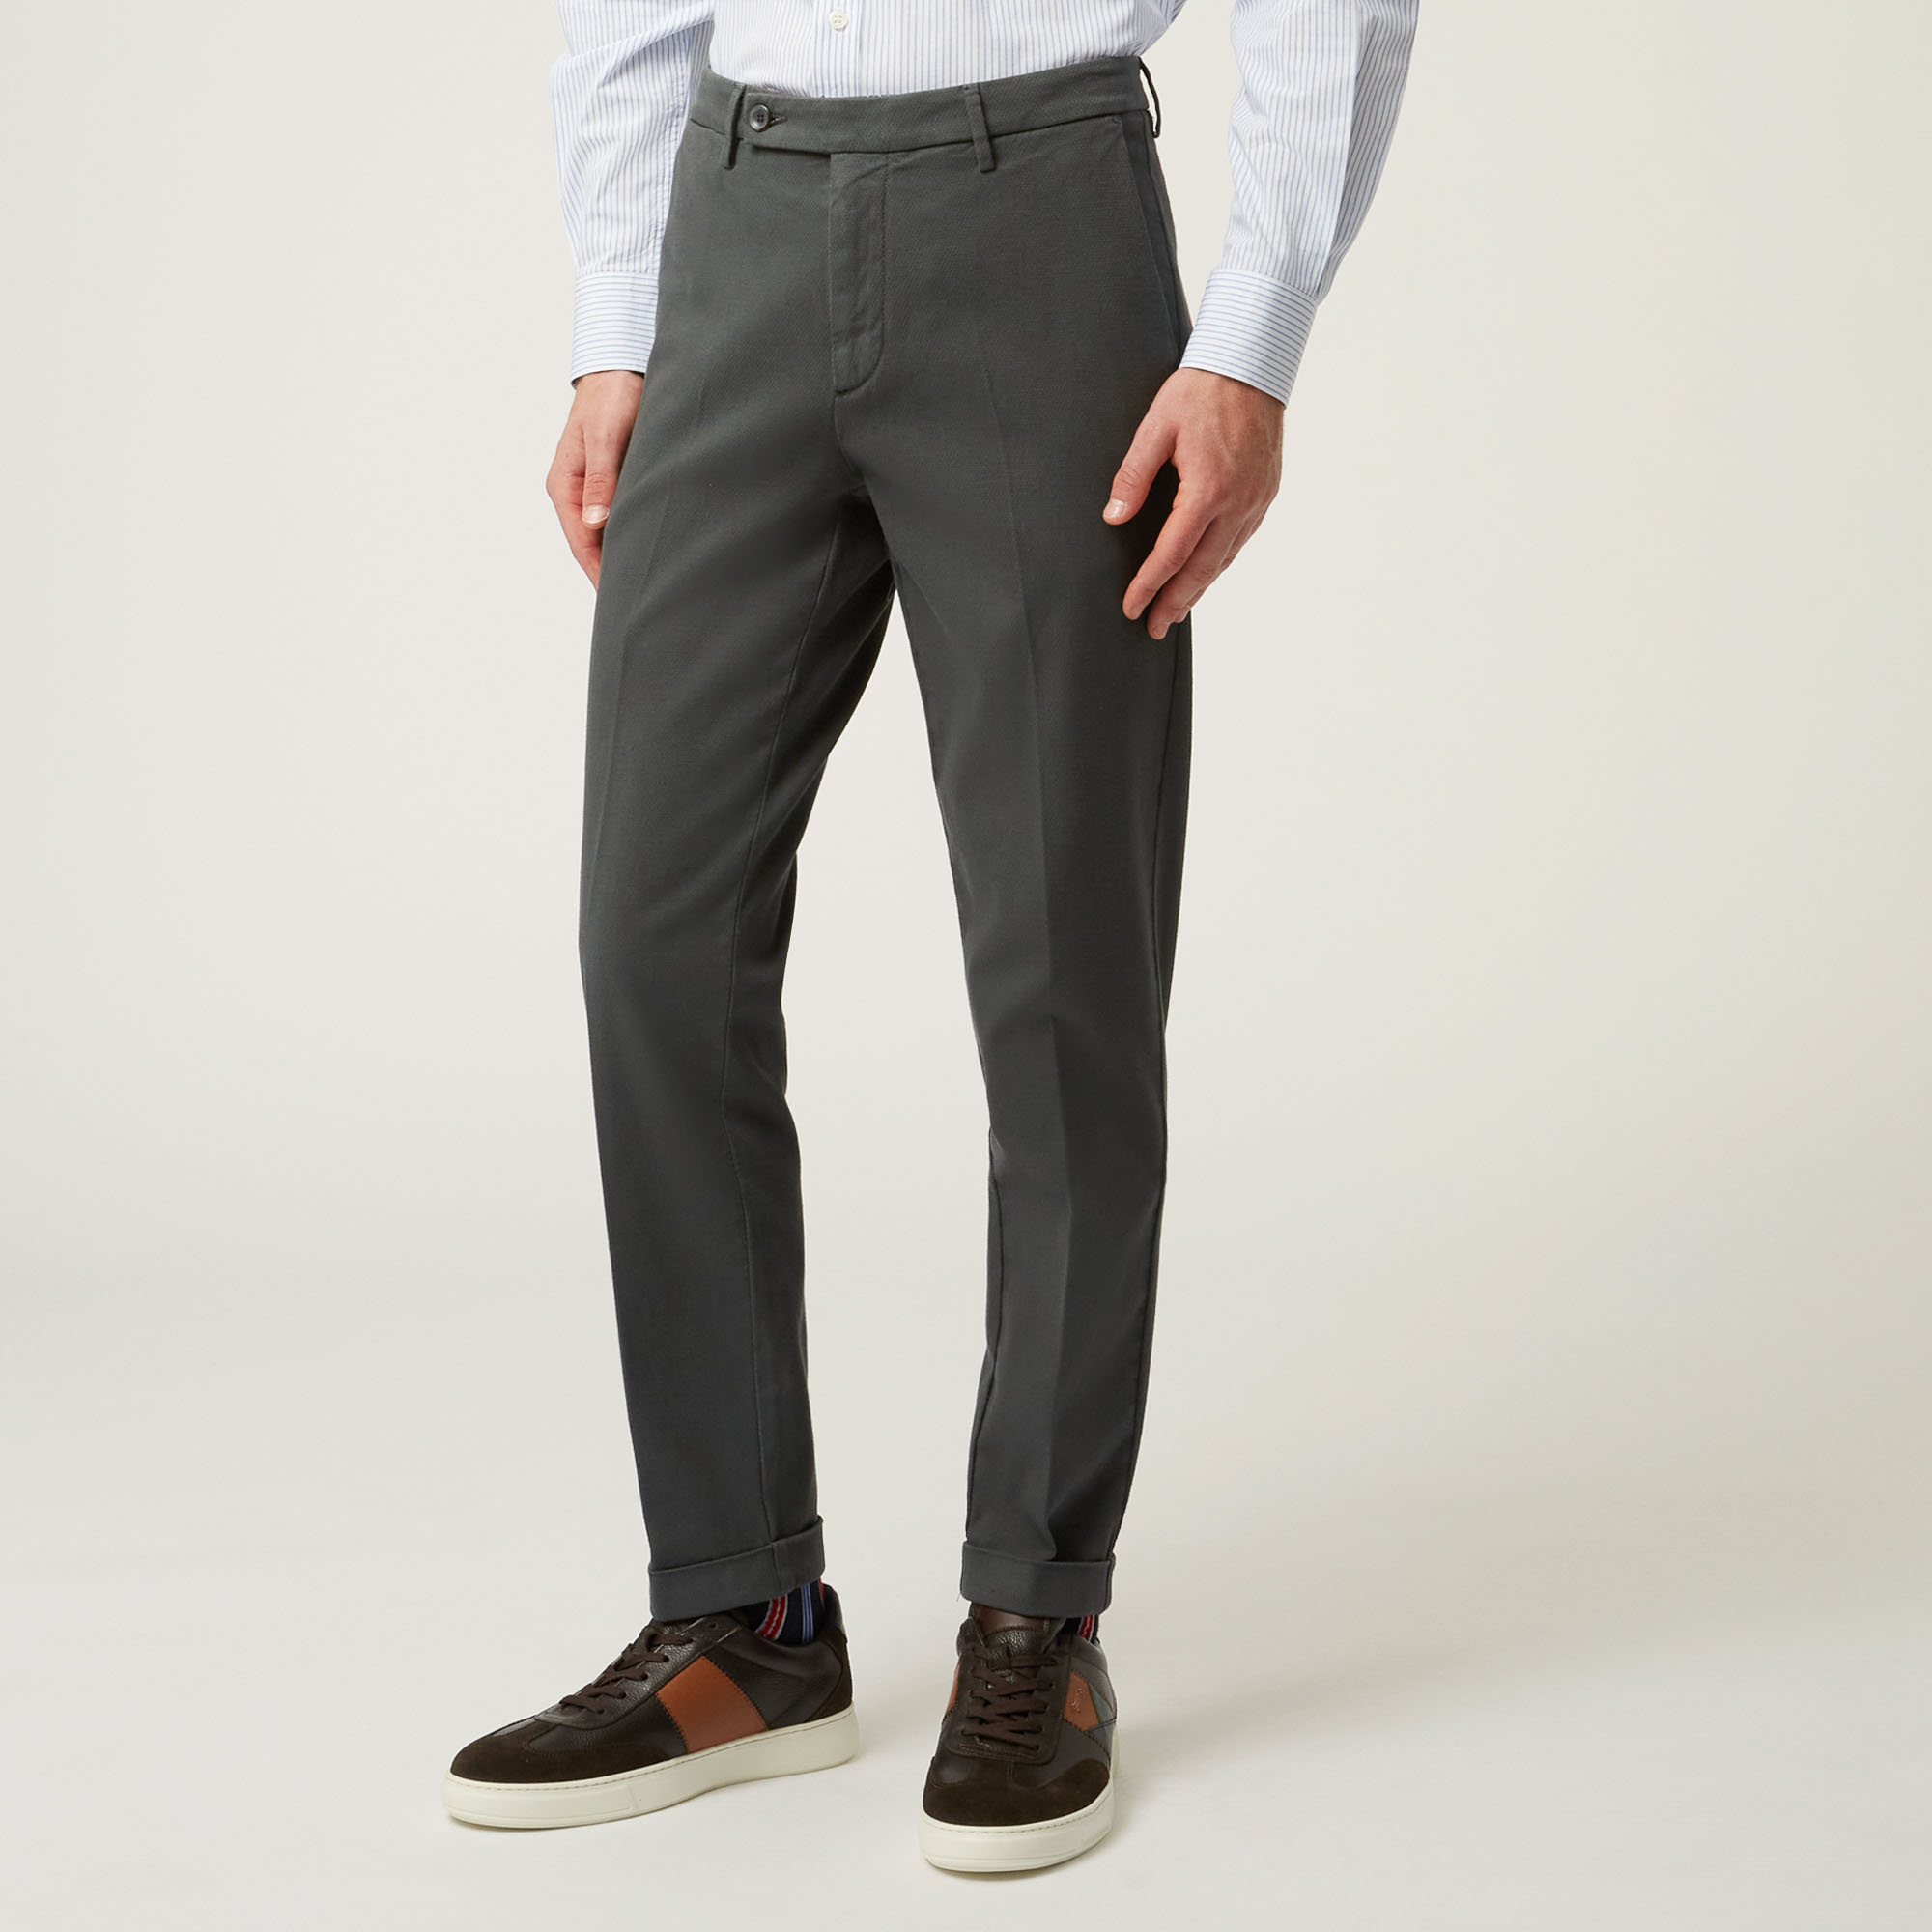 Pantalone In Cotone Stretch, Grigio, large image number 0